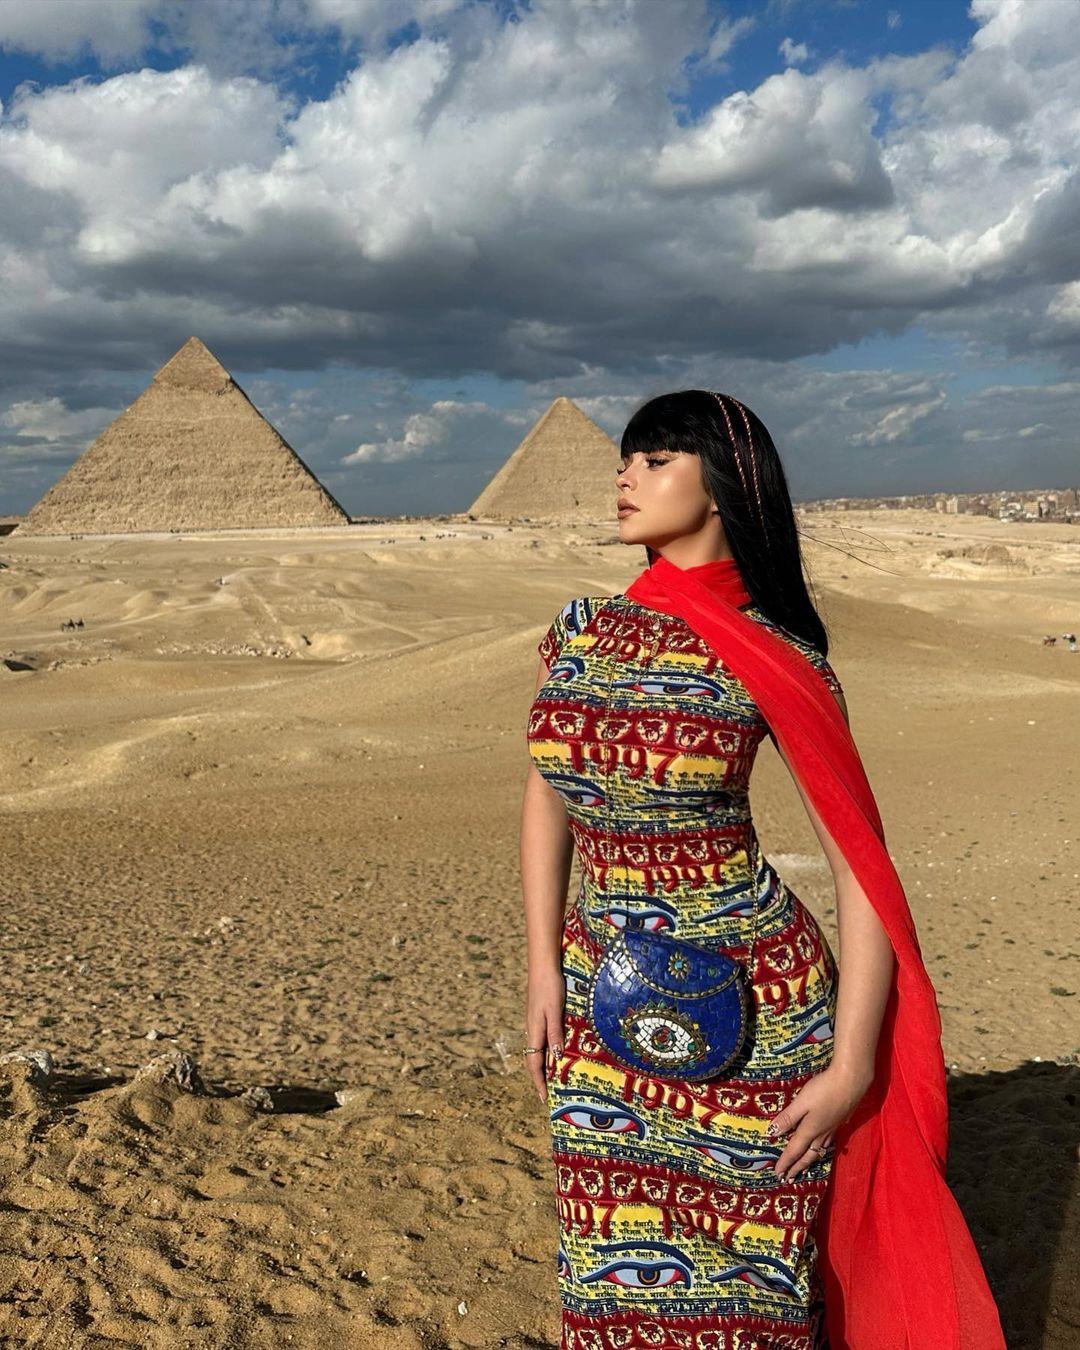 Demi Rose striking a pose in front of a pyramid in Egypt.